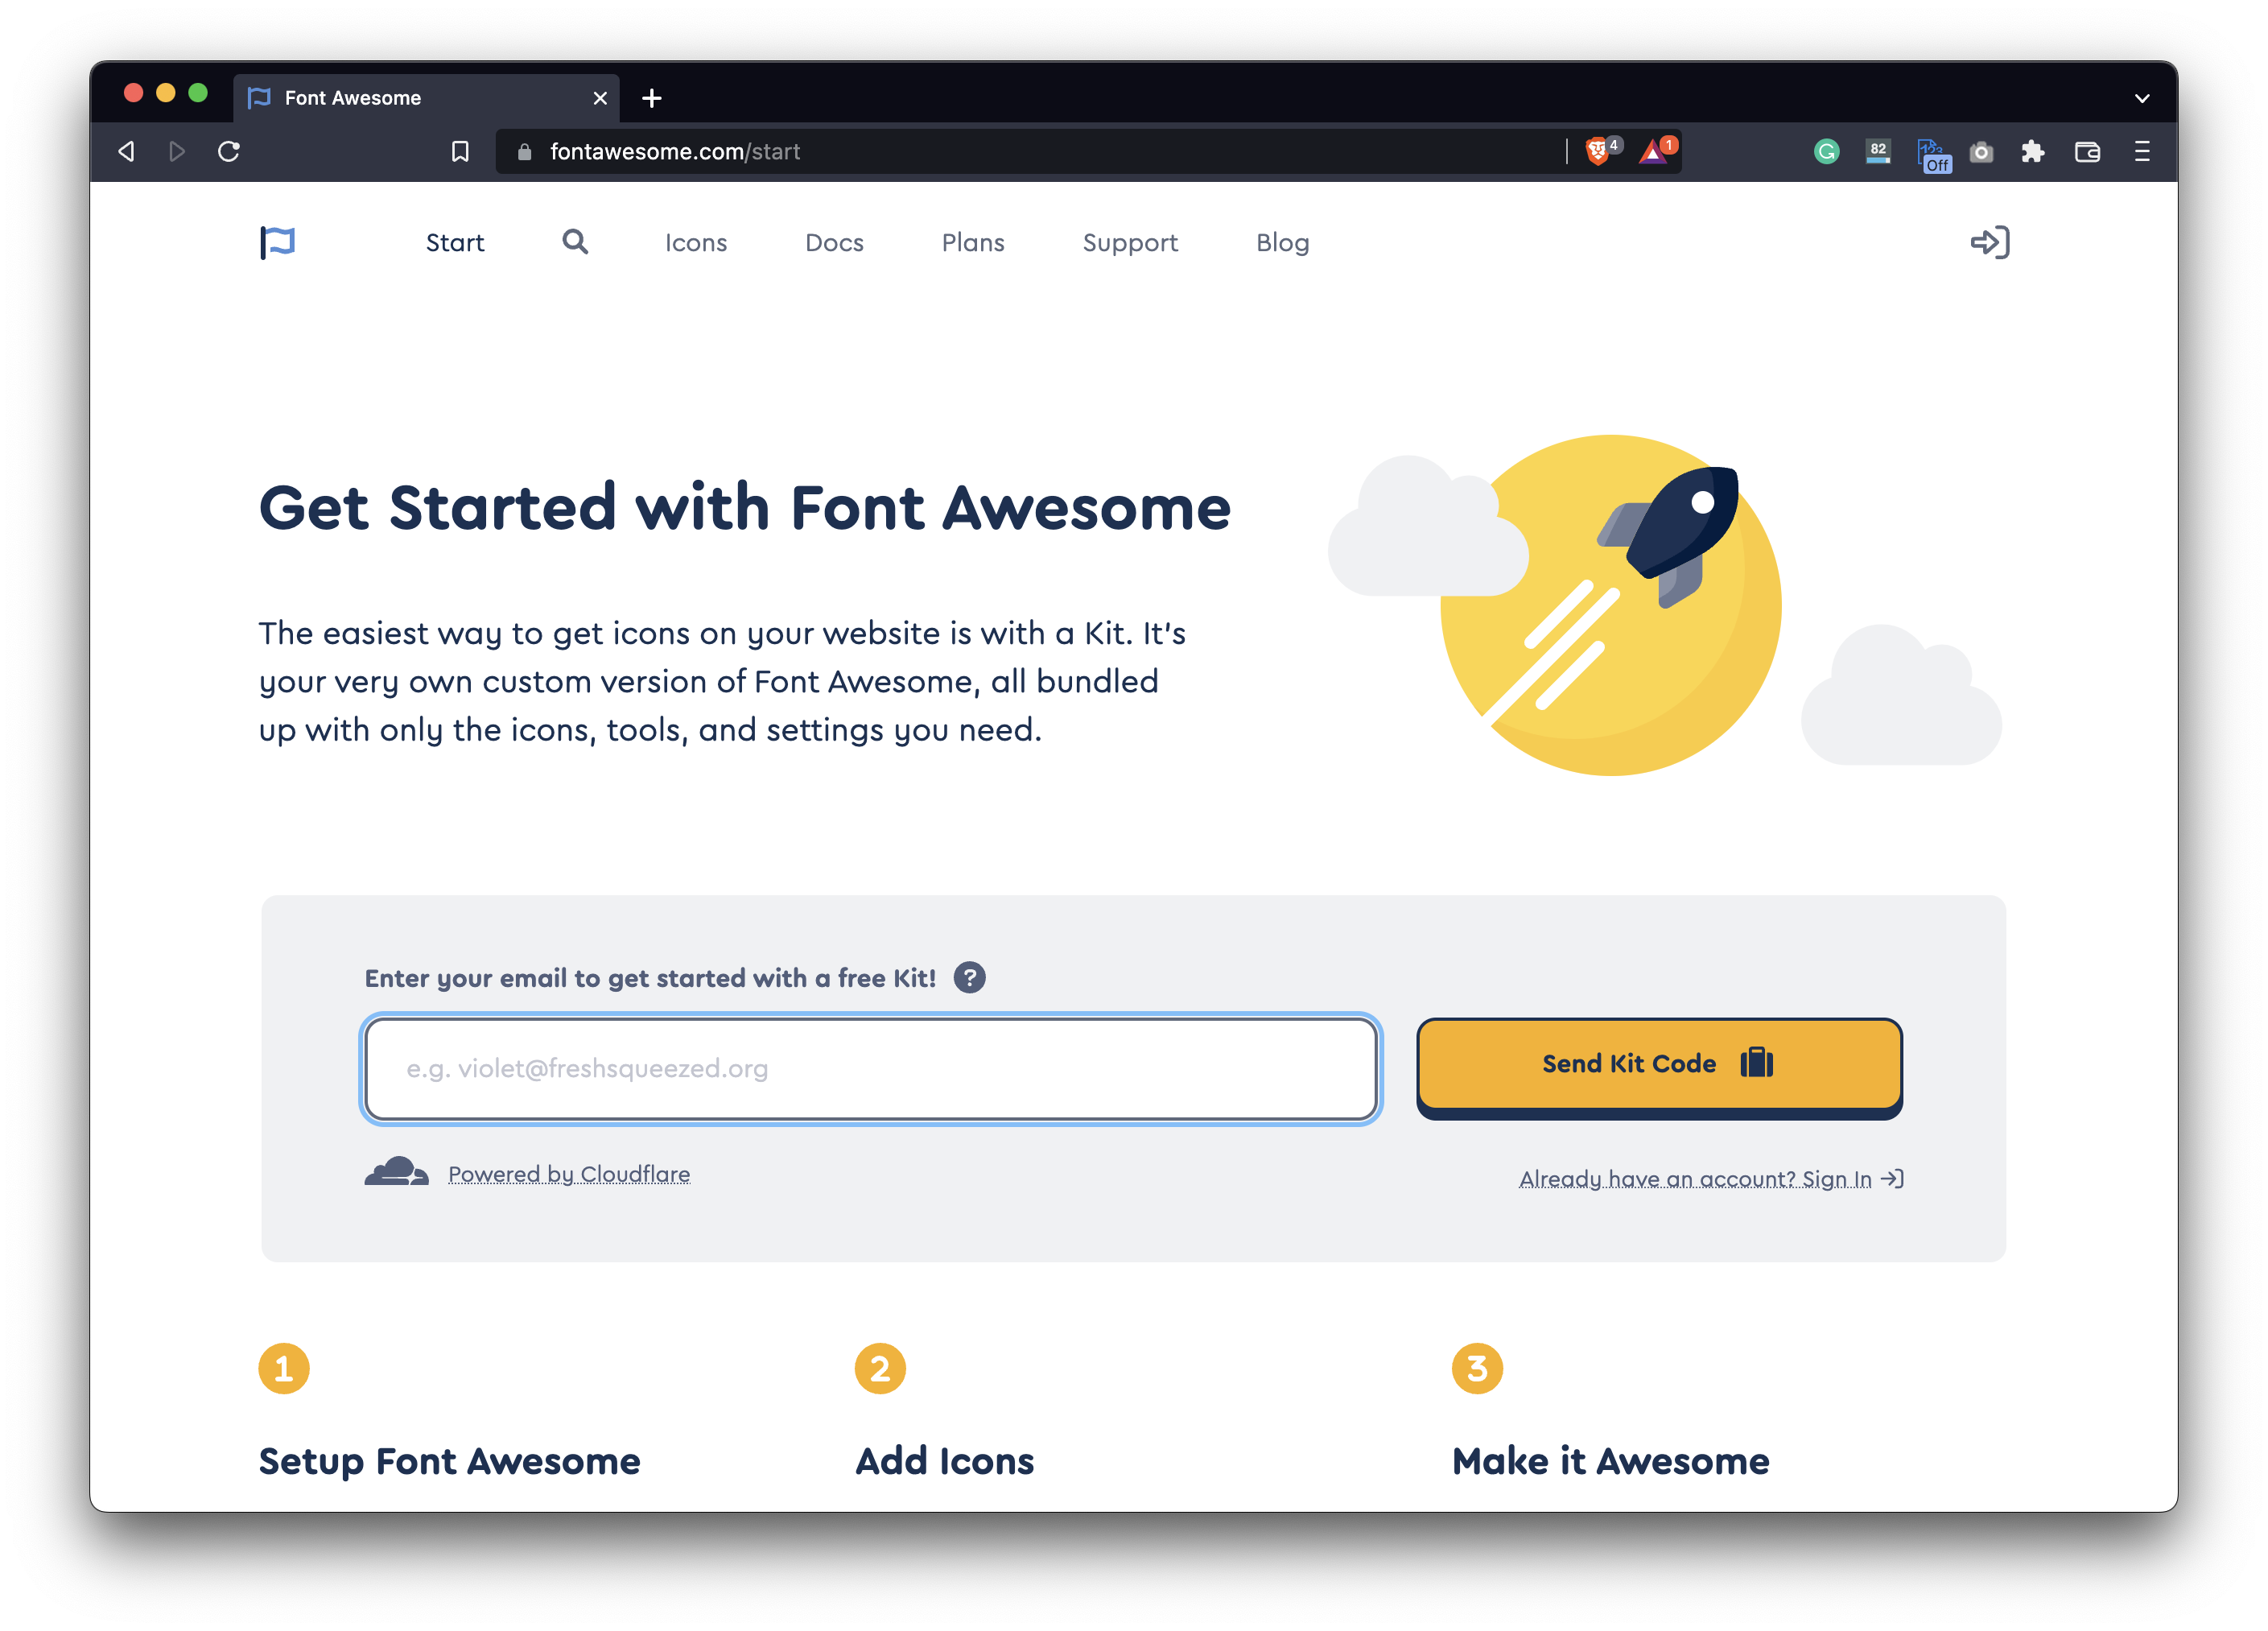 Image 1 - FontAwesome get started page